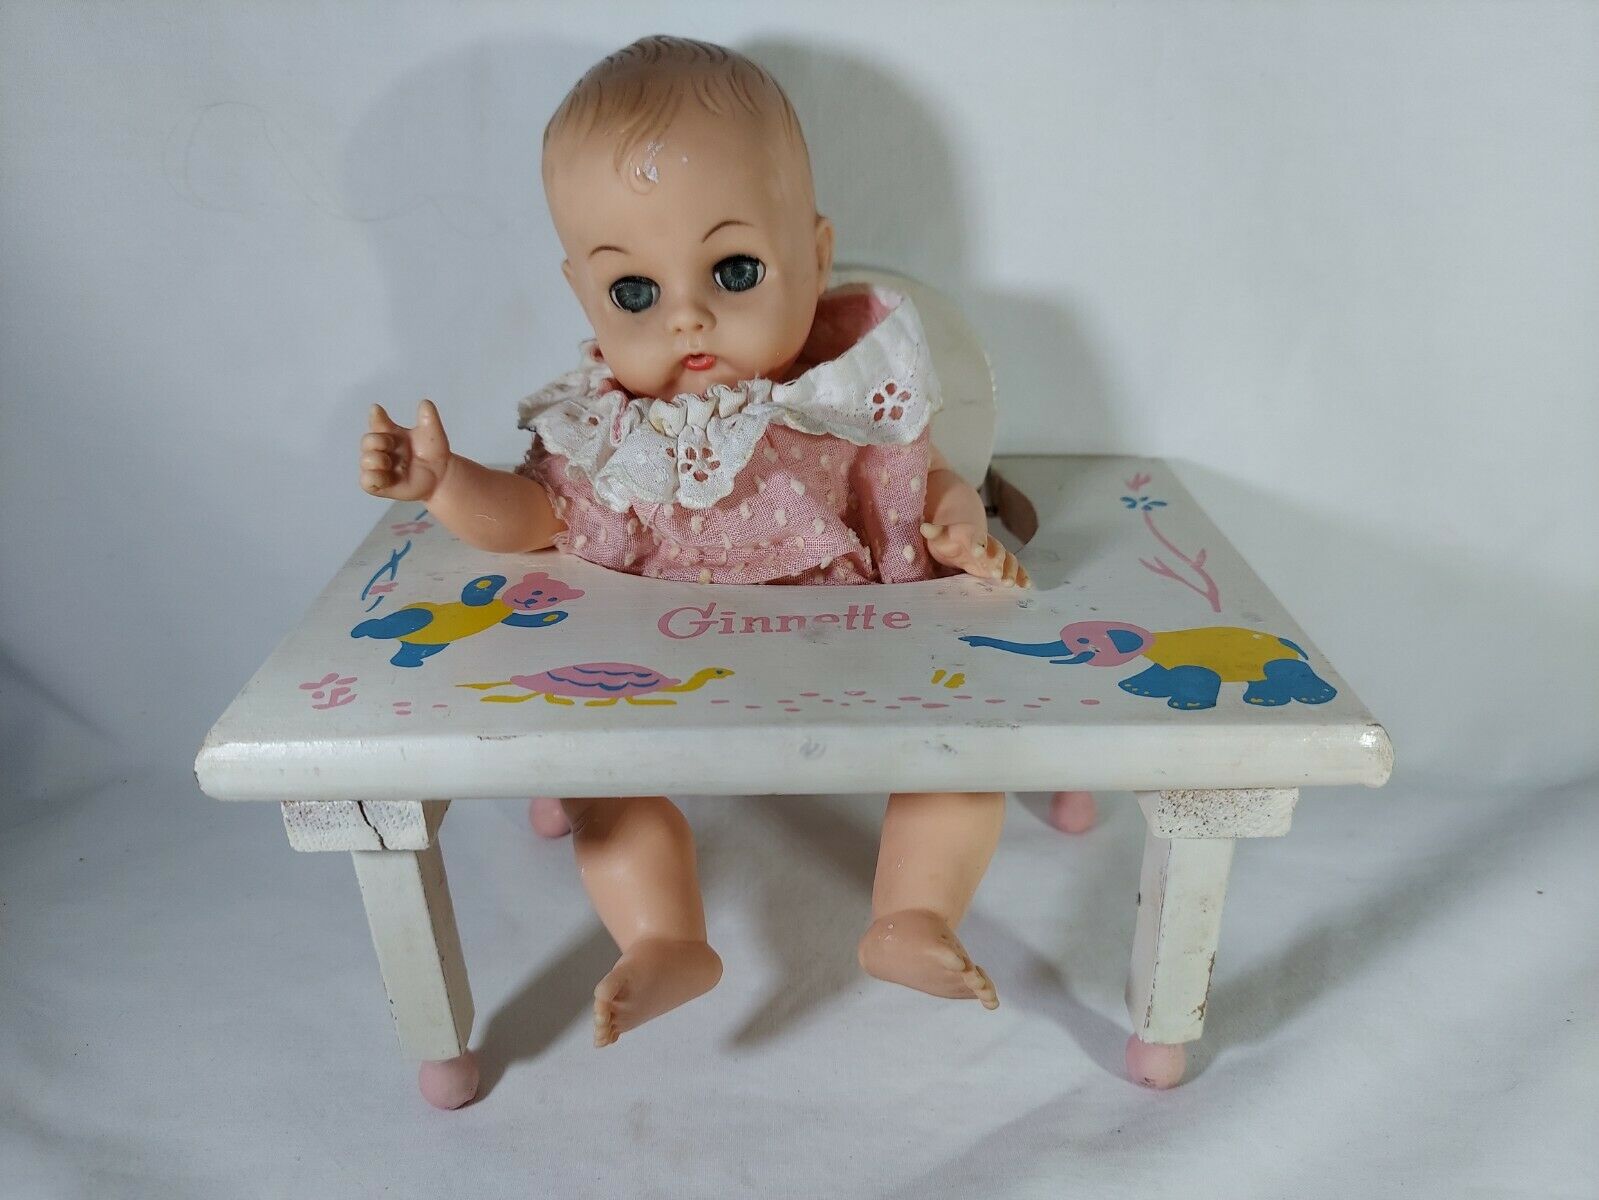 Vintage Ginnette Vogue Doll 1950s 8" W/ Feeding Chair Play Table Nice!